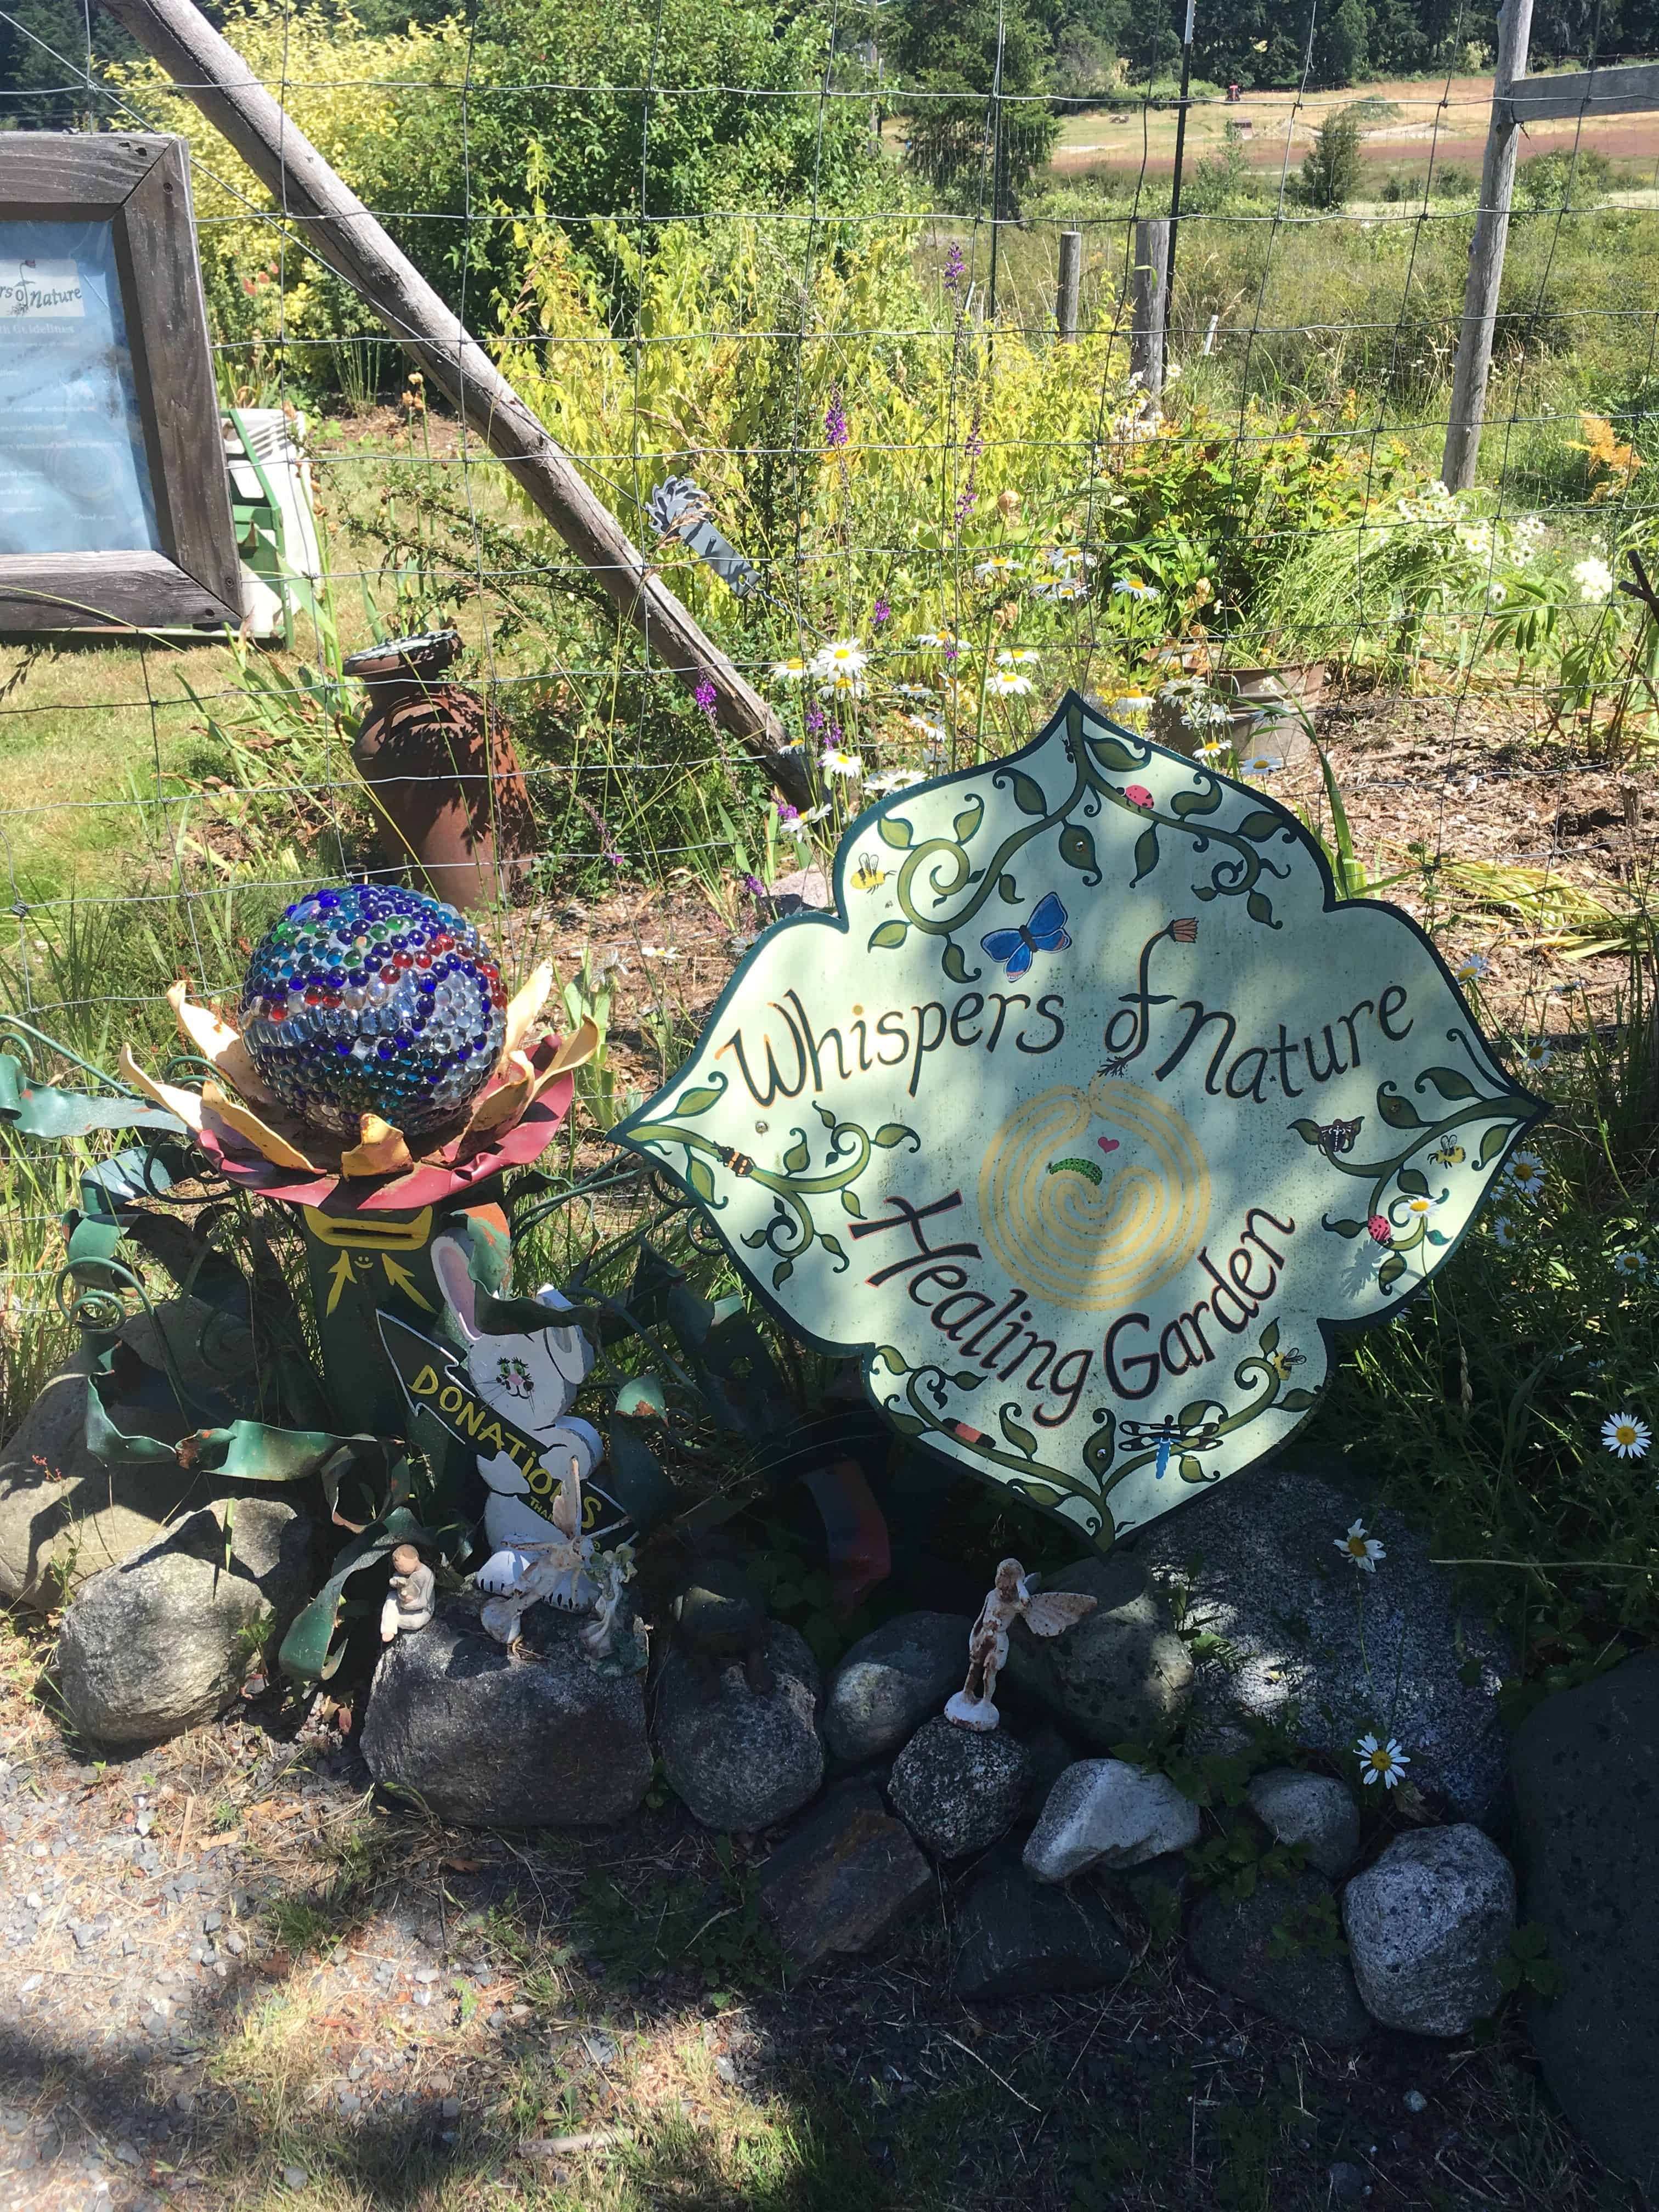 Entry to Whispers of Nature Healing Garden